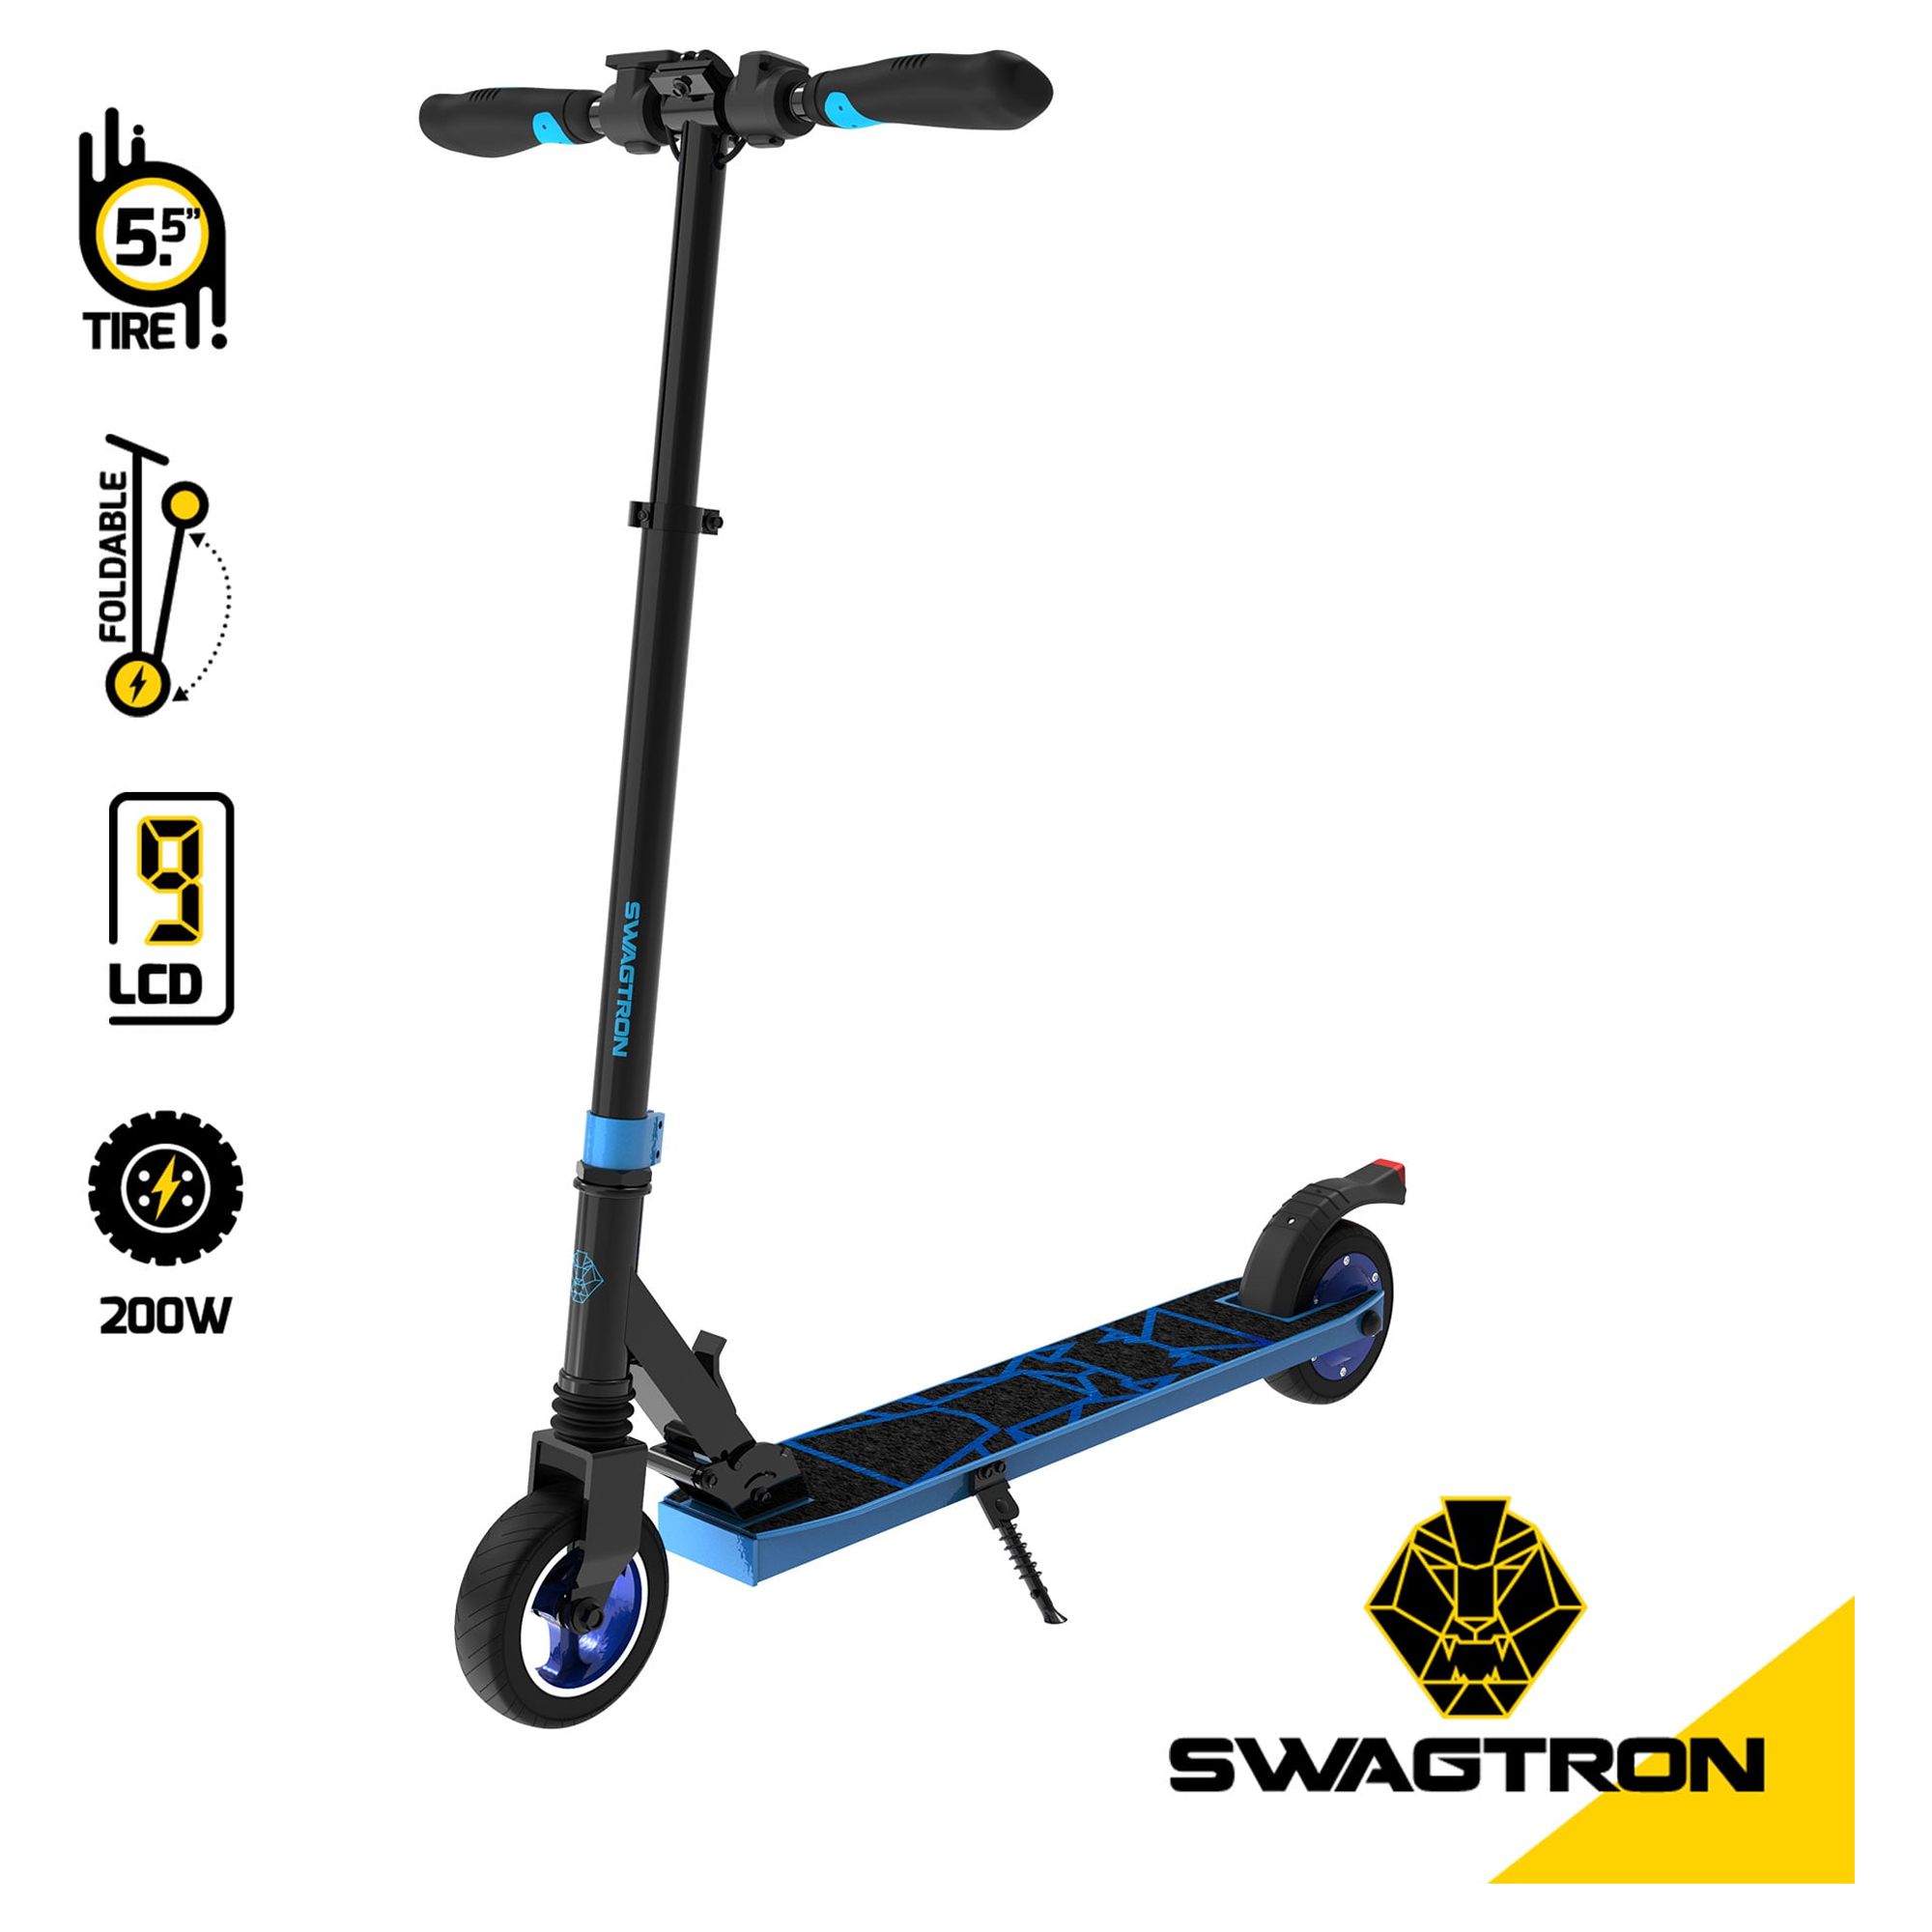 Swagtron Swagger 8 Folding Kids Electric Scooter Lightweight 250 W Quiet Motor Kick-to-Start Cruise Control 15 MPH UL 2272 Certified IPX4 - image 3 of 9